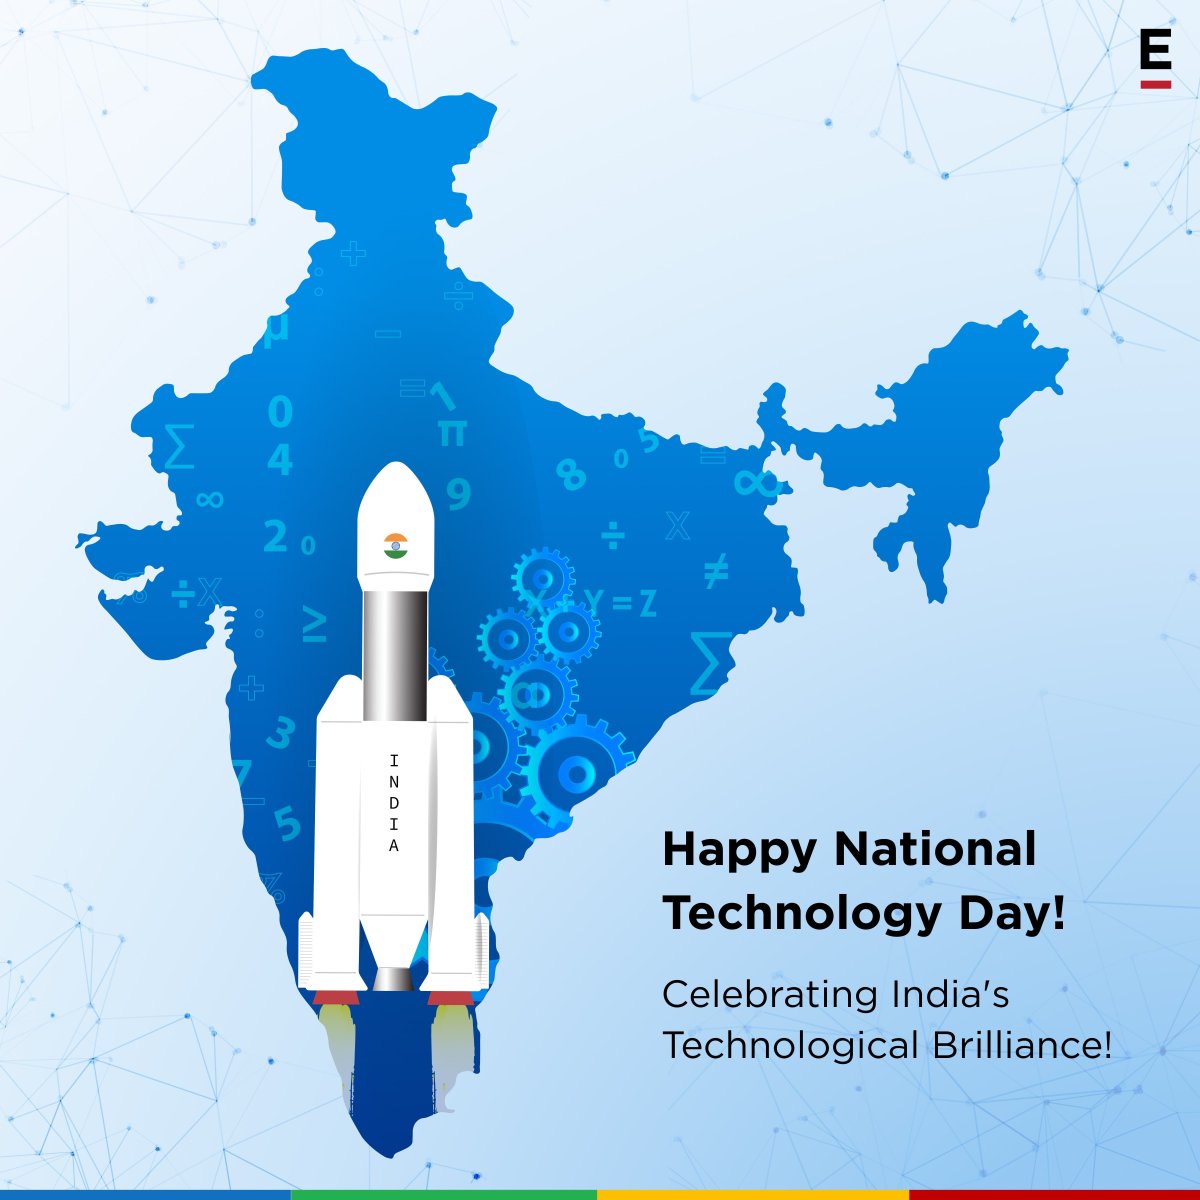 Did you know? #NationalTechnologyDay commemorates India’s Pokhran Nuclear Tests, and the subcontinent’s journey in technological advancements. Let's salute the innovators paving the way for a brighter future!
What's the coolest piece of Indian tech that inspires you? Let us know!